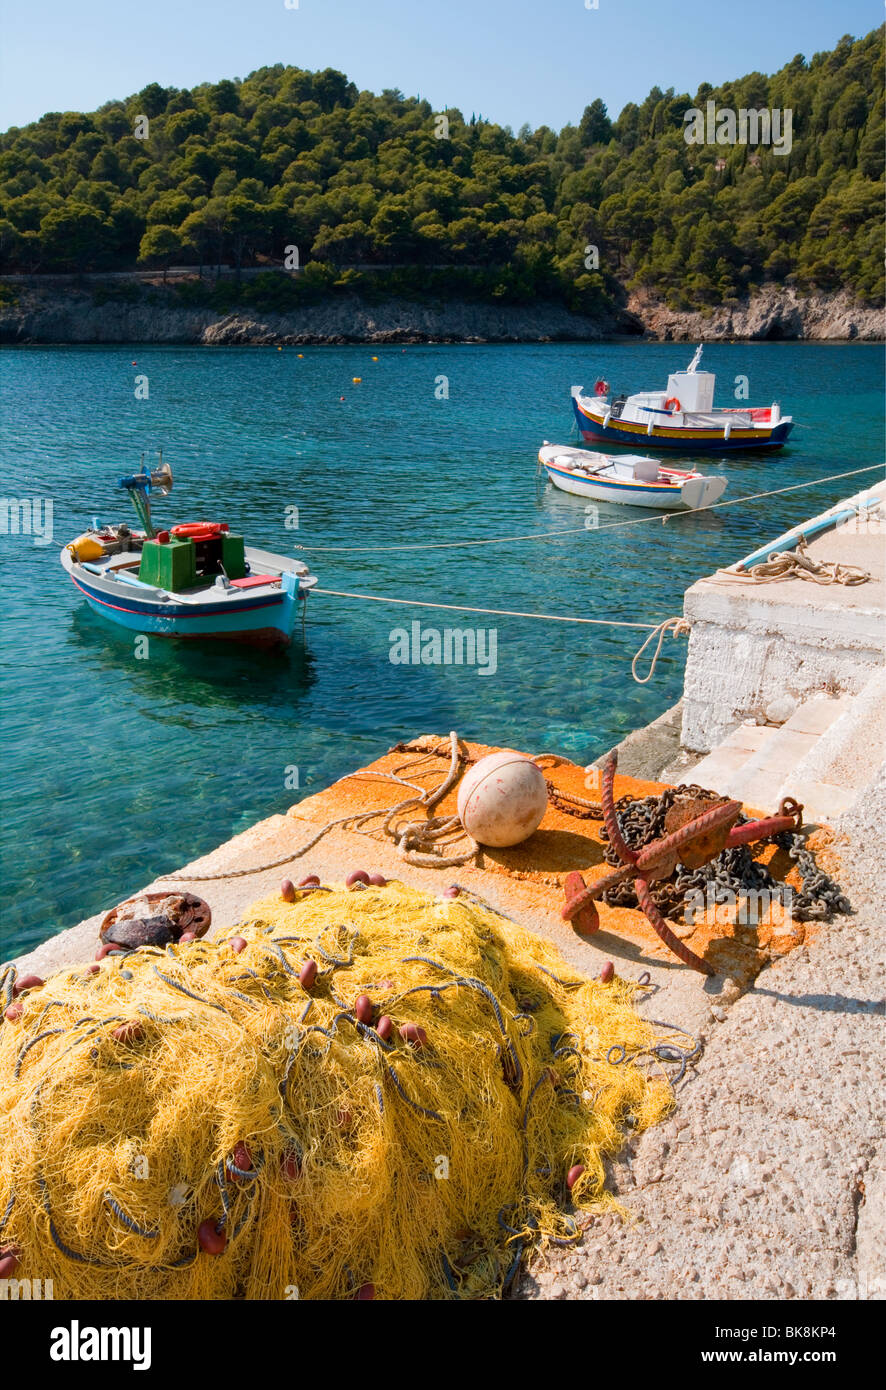 Assos, Kefalonia - one of the prettiest coastal villages in Greece Stock Photo